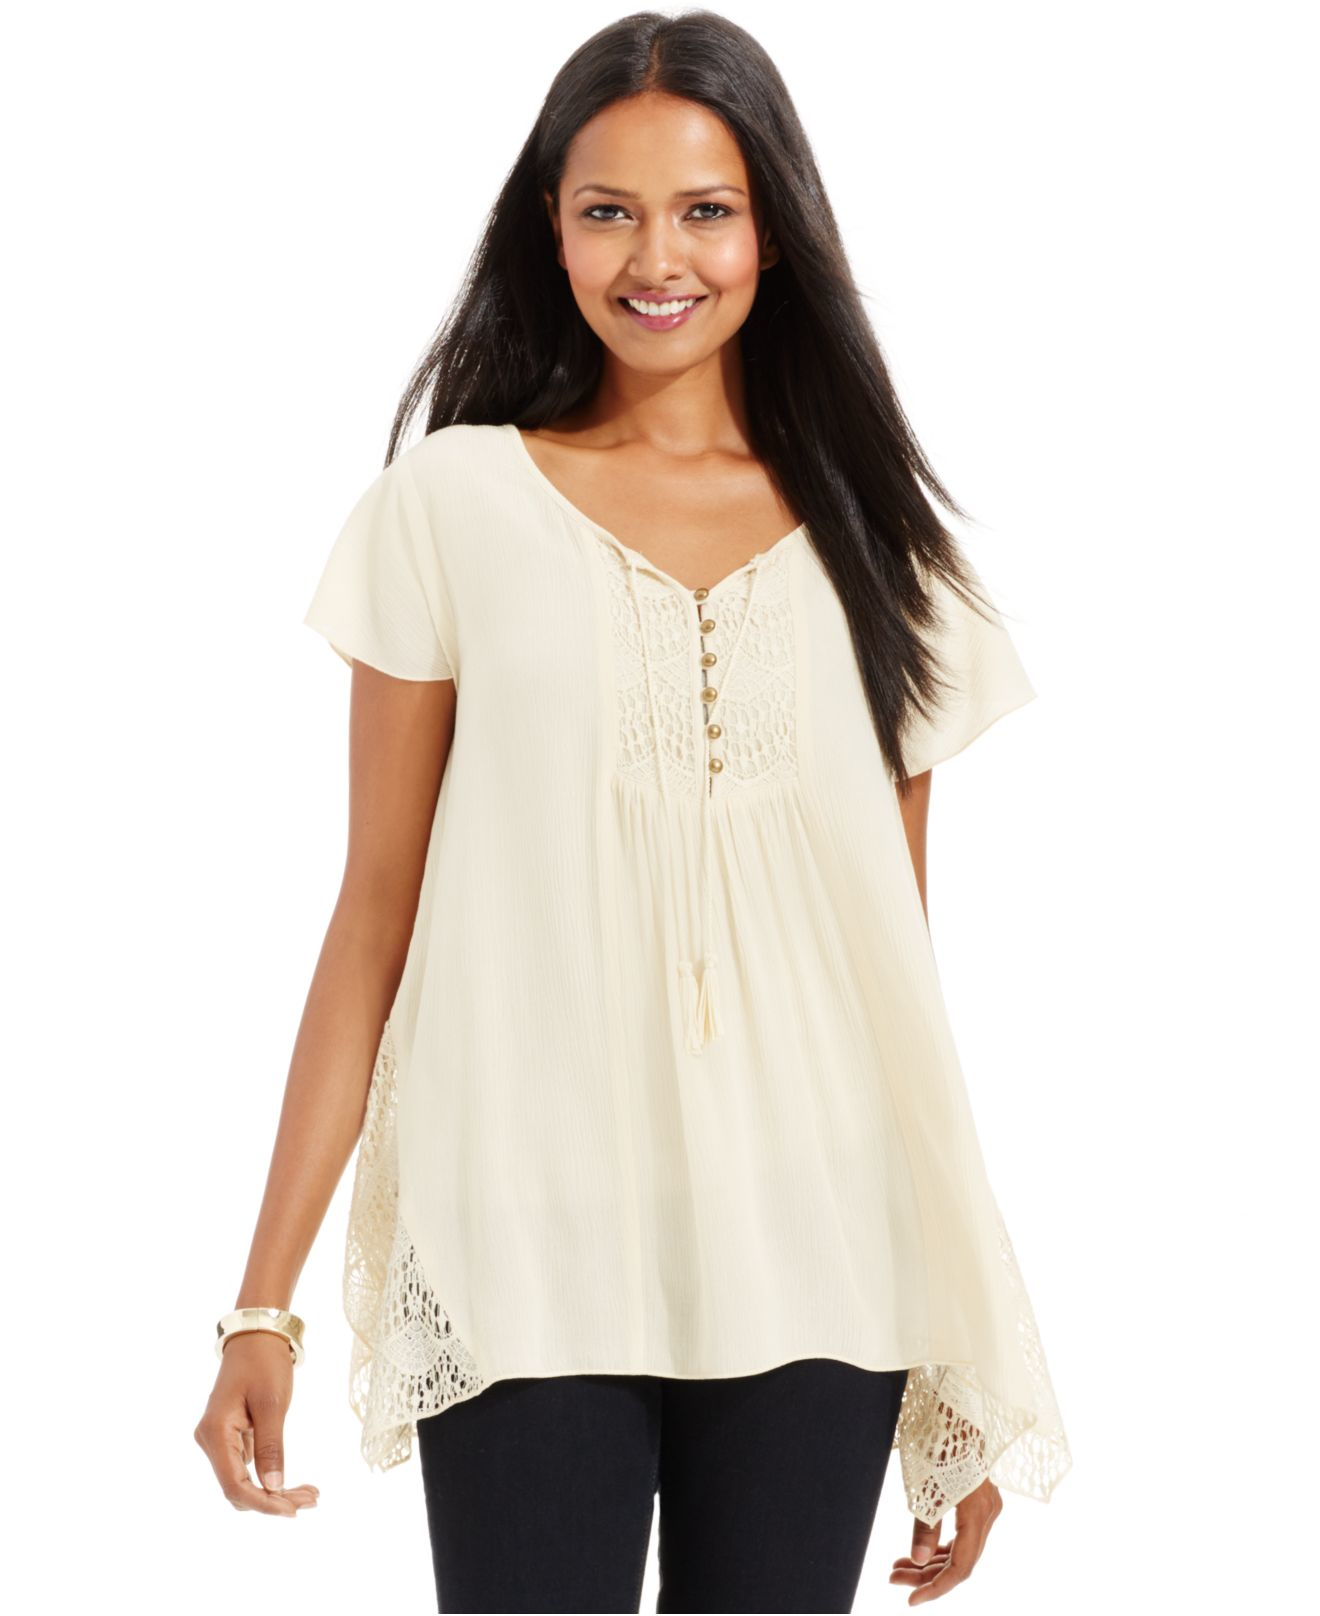 Lyst - Style & Co. Lace-inset Peasant Blouse in White